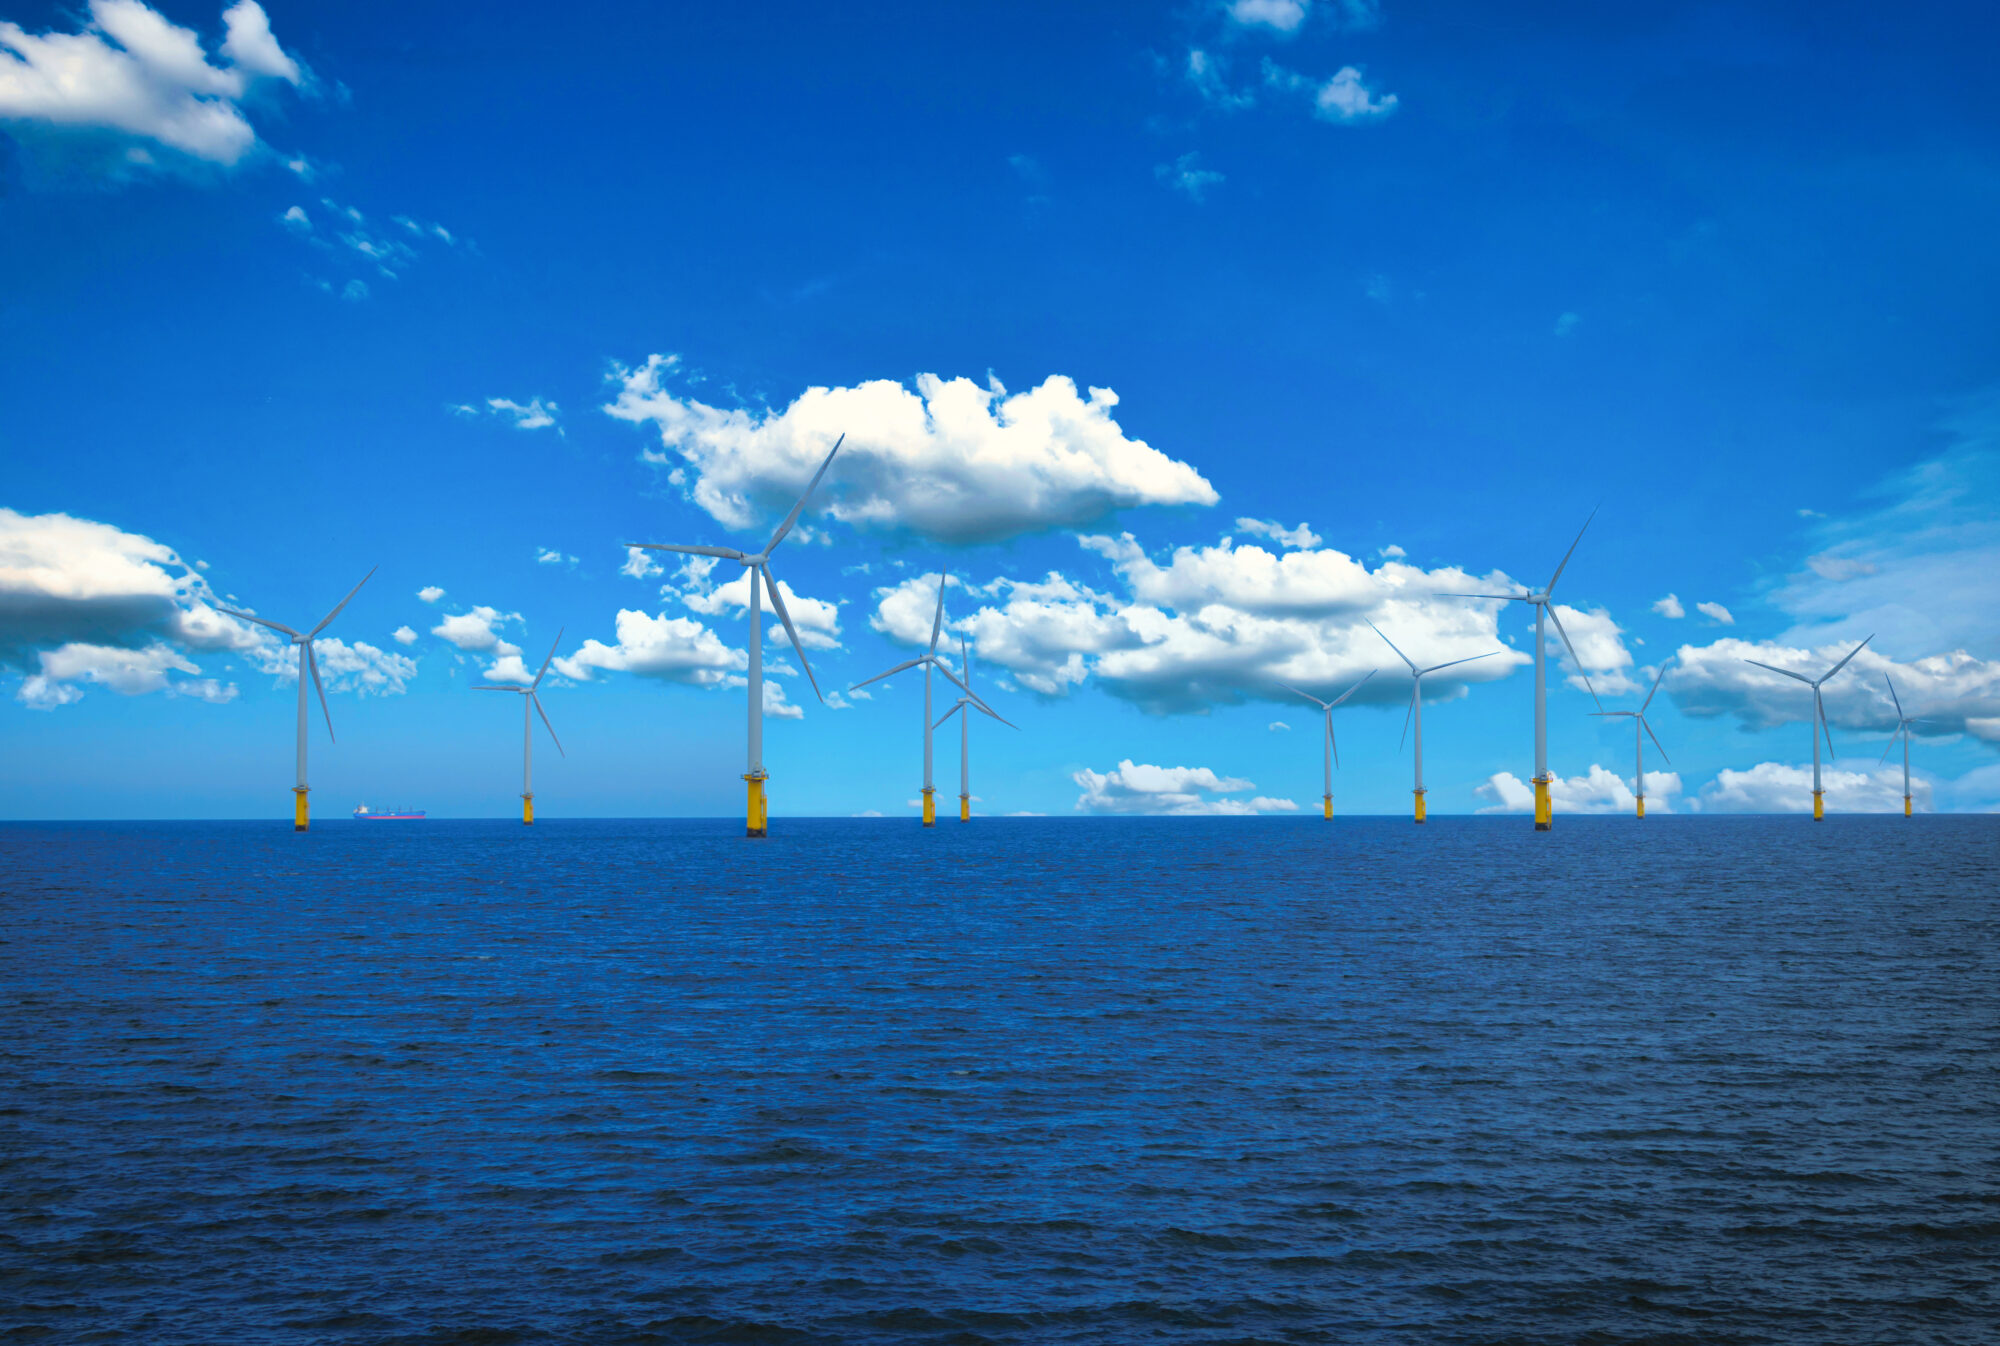 Offshore Wind Turbine in a Wind farm under construction off coast of England